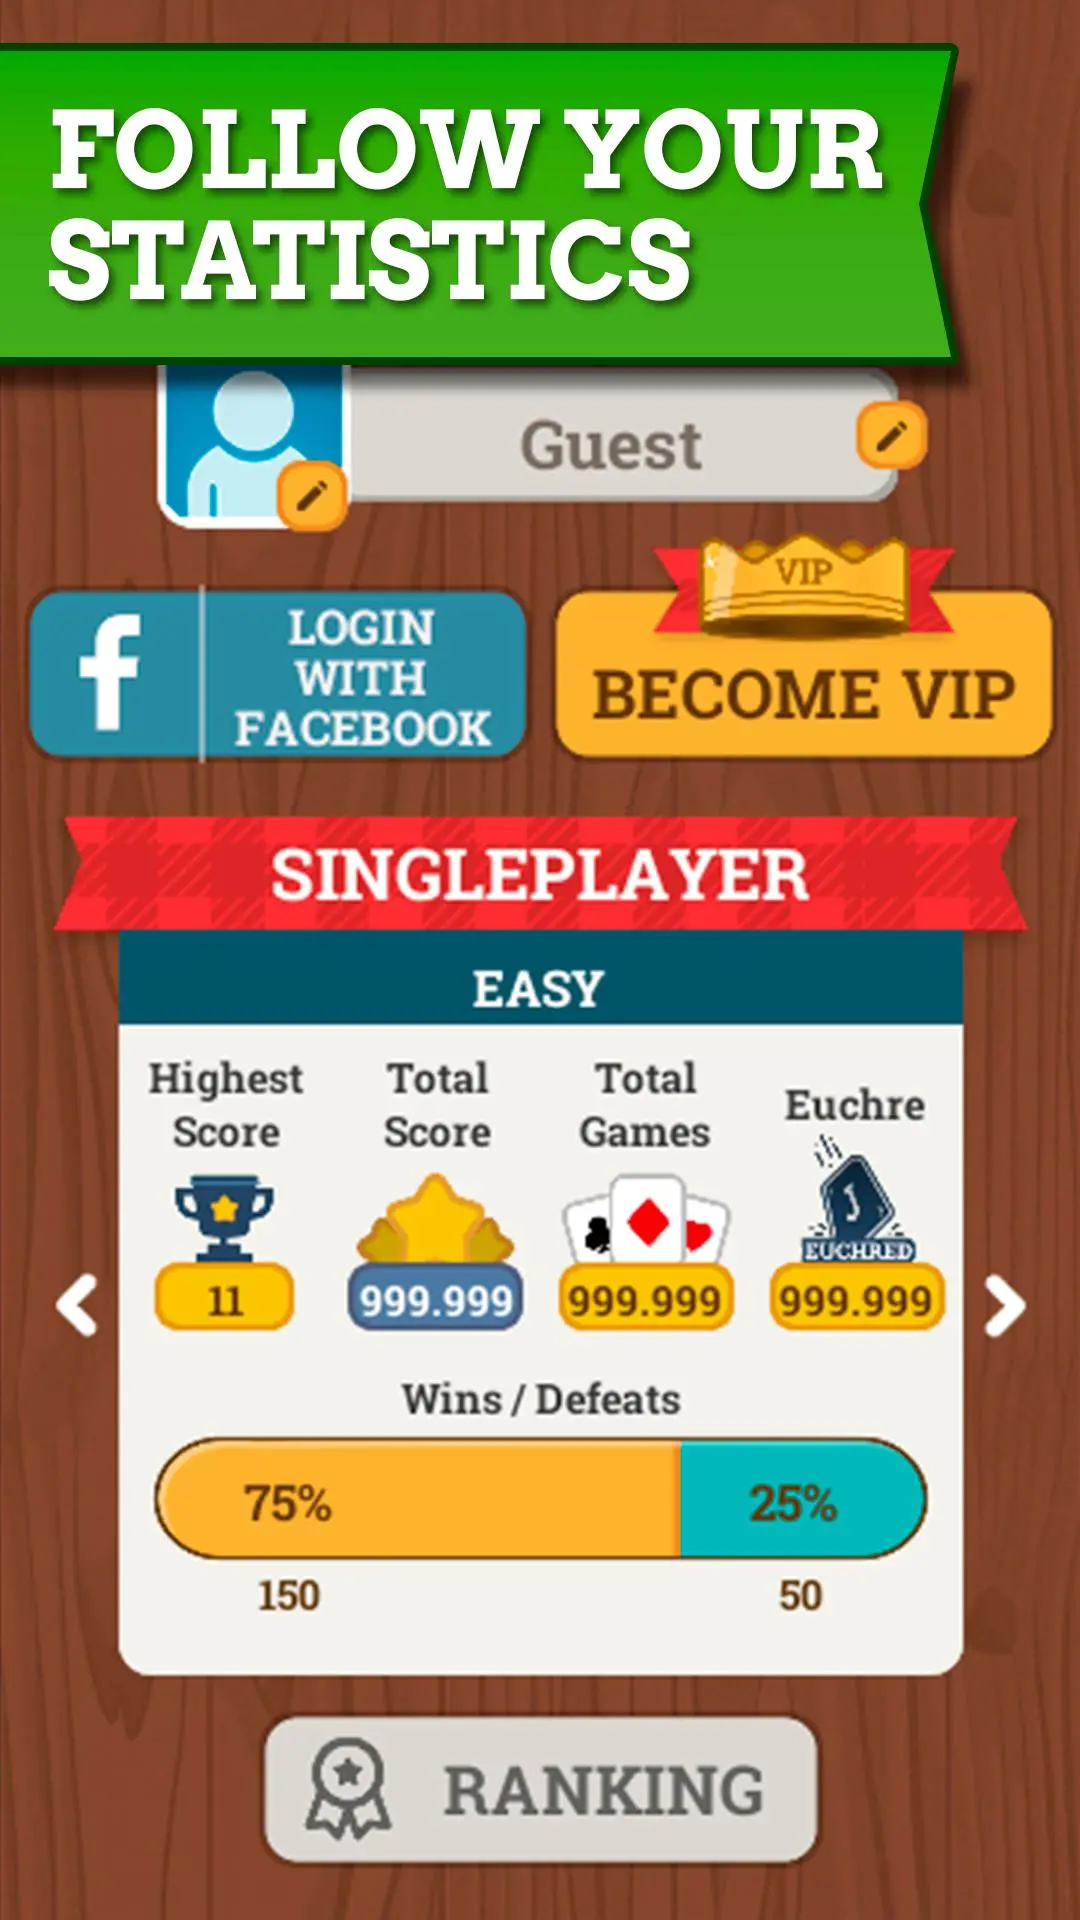 Download Euchre Jogatina Cards Online android on PC